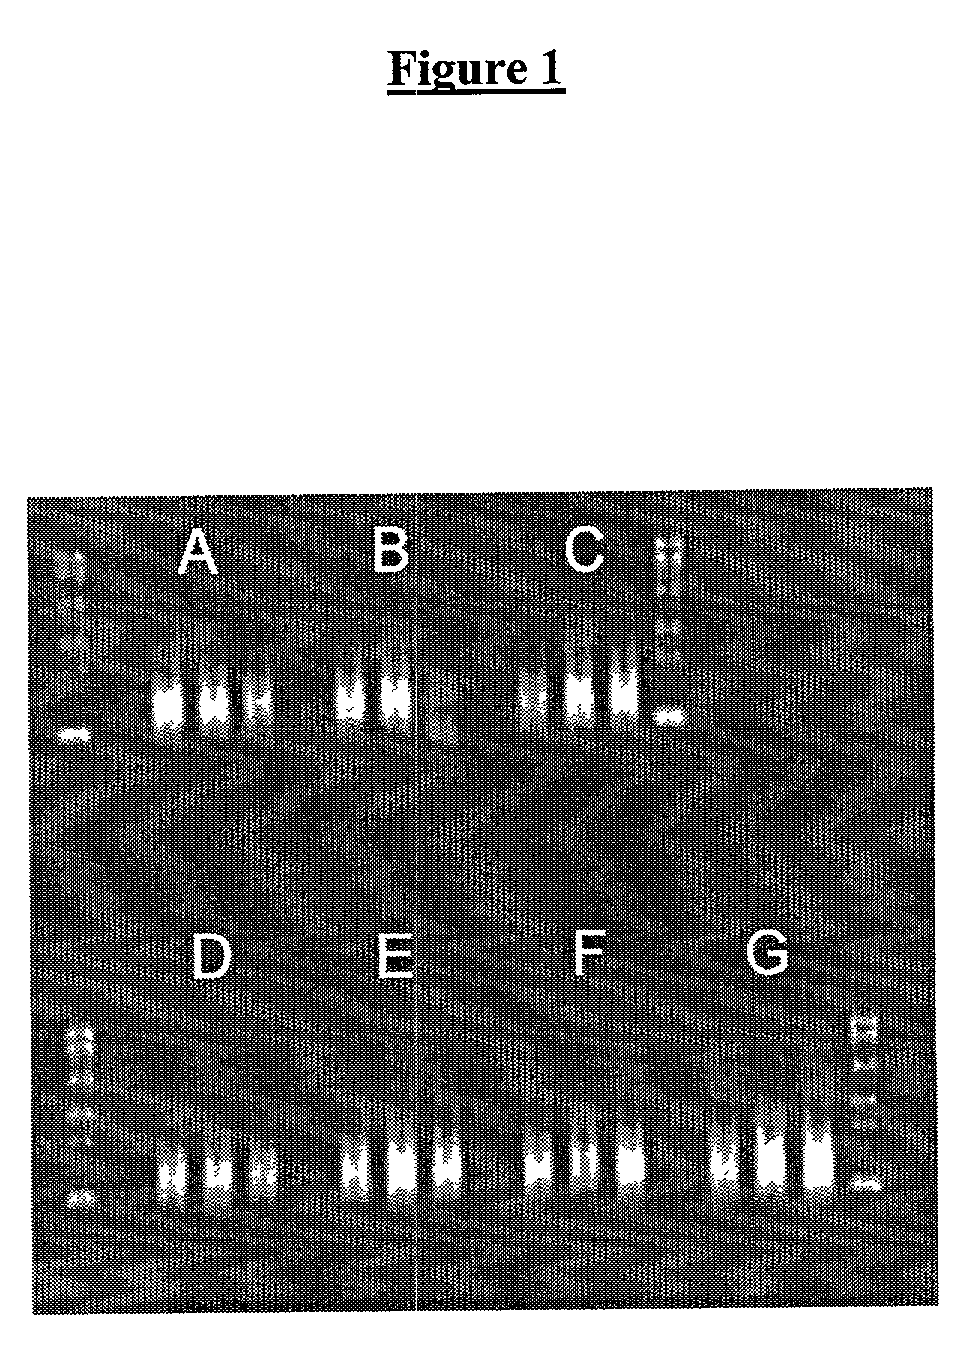 Method for generating amplified RNA